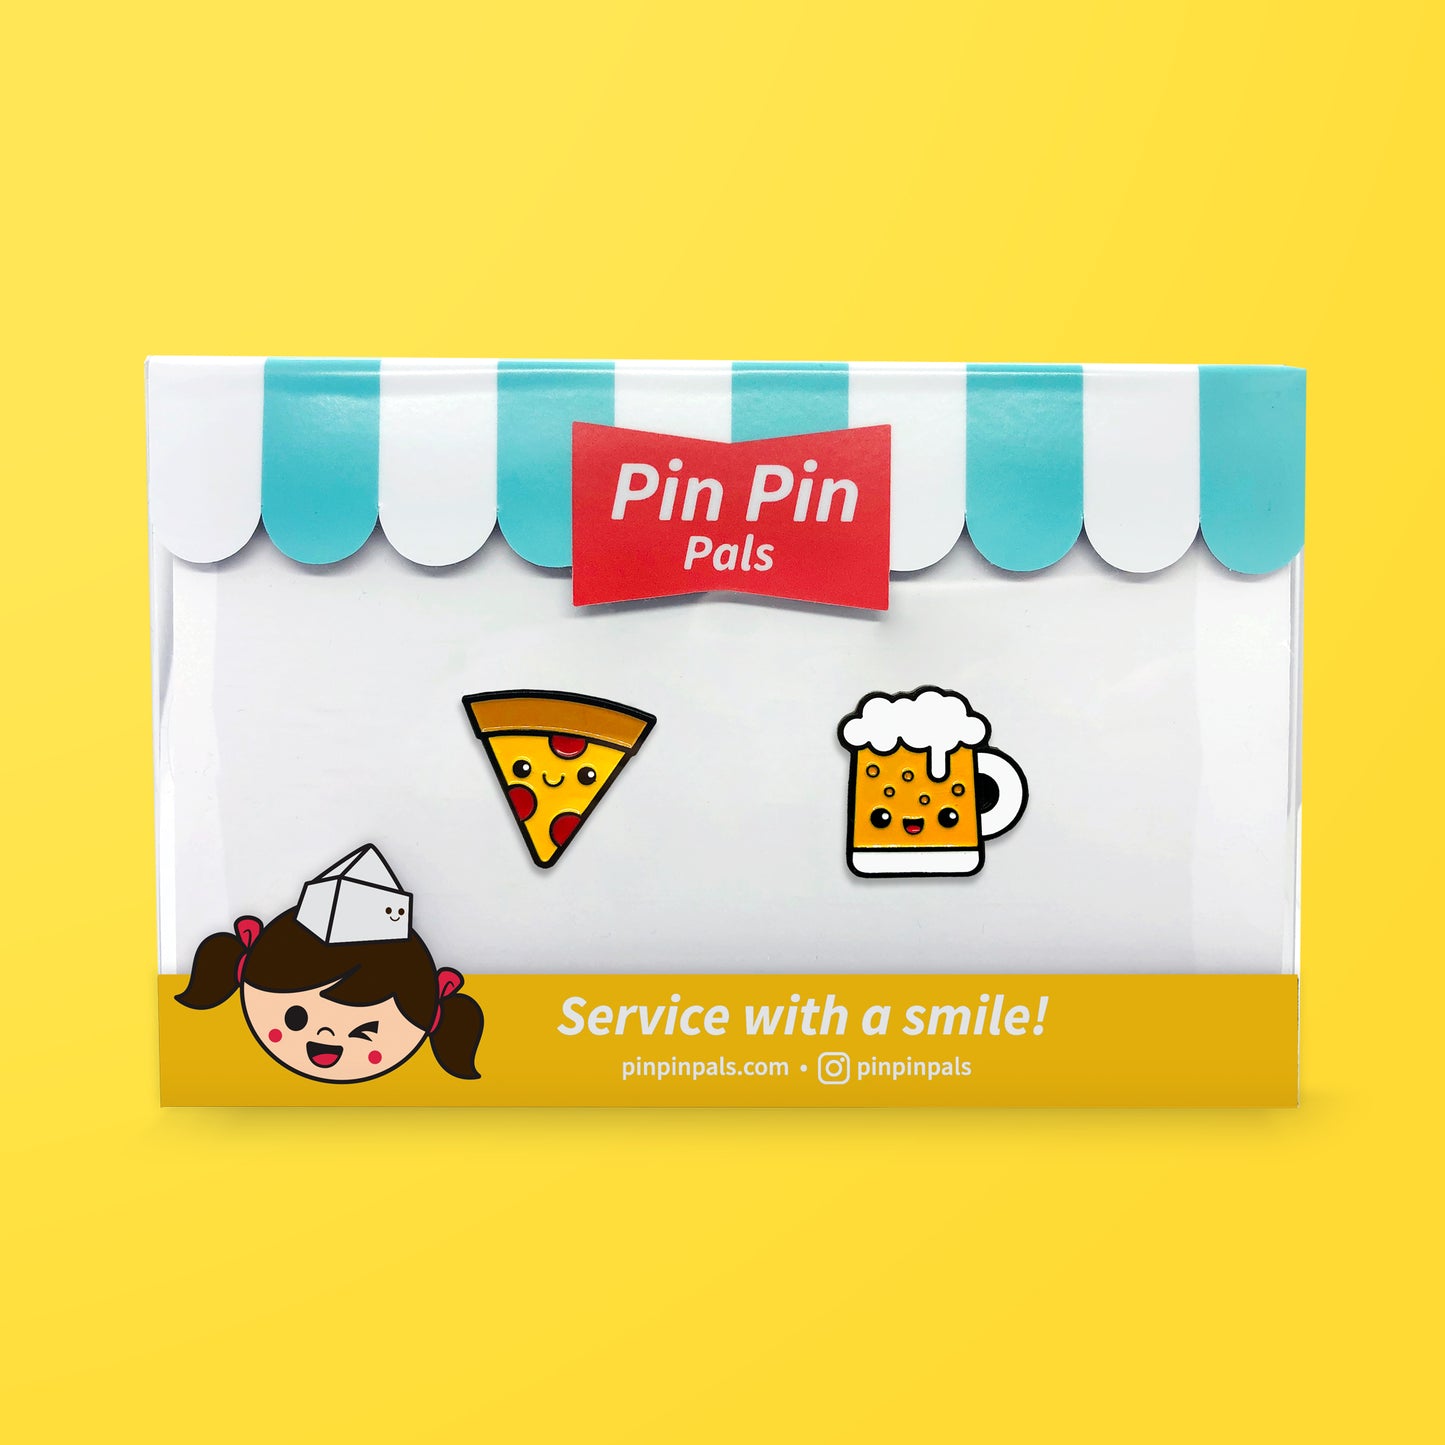 Pin Pin Pals Pizza and Beer enamel pin set in packaging box on yellow background